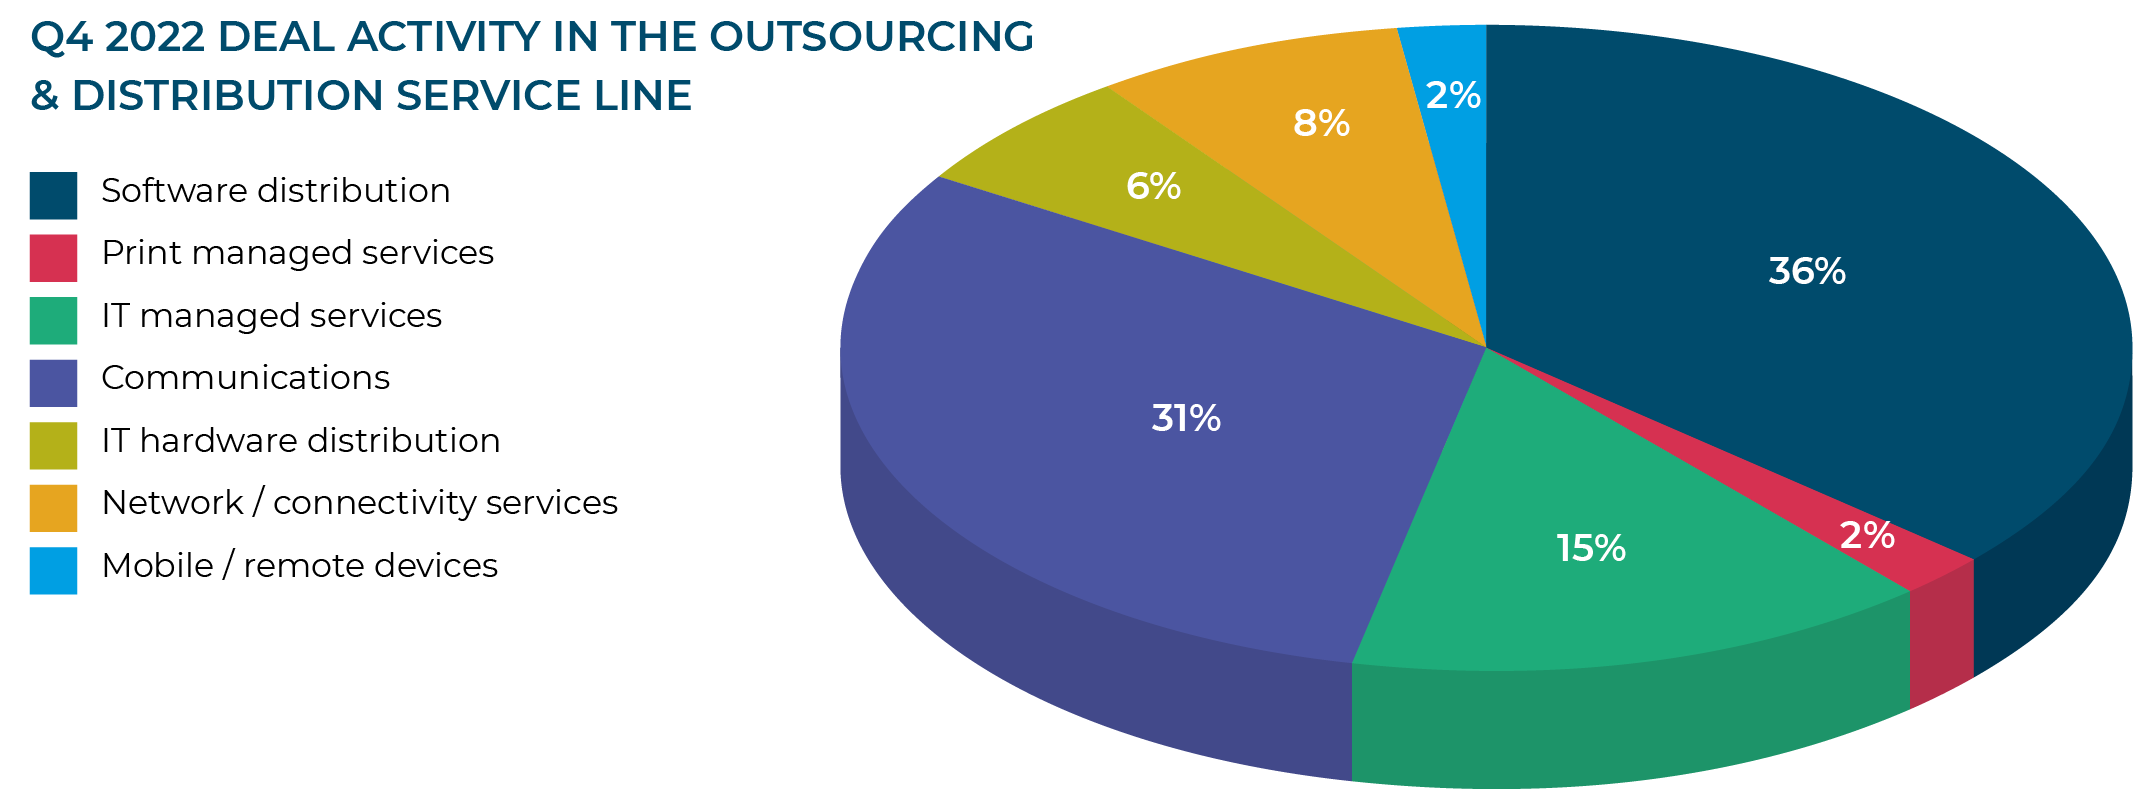 Q4 2022 DEAL ACTIVITY IN THE OUTSOURCING & DISTRIBUTION SERVICE LINE